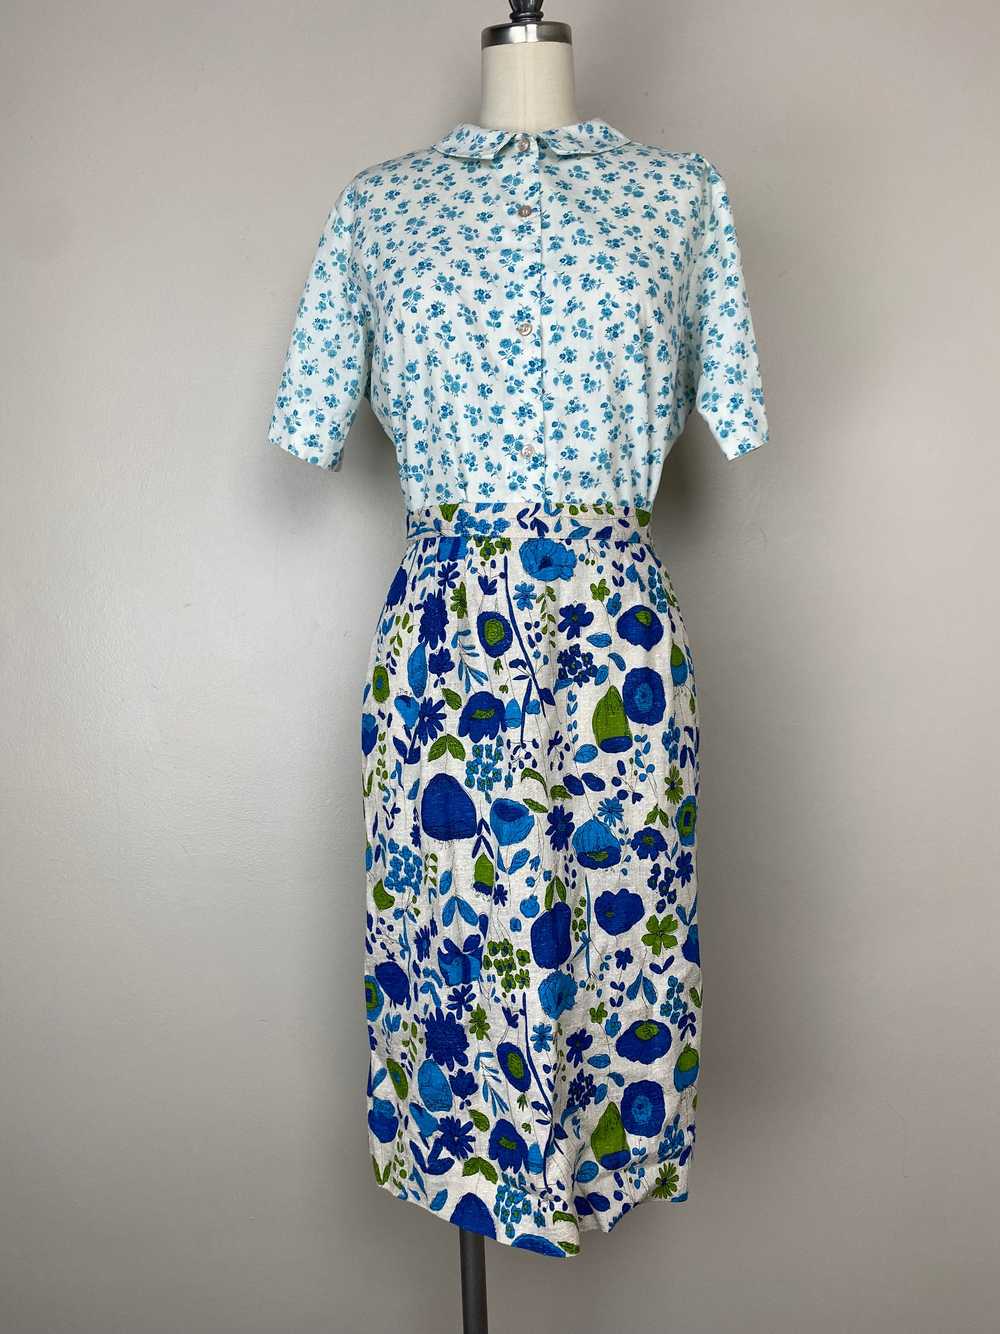 1960s Blue Floral Pencil Skirt, Size Small, 25.5"… - image 7